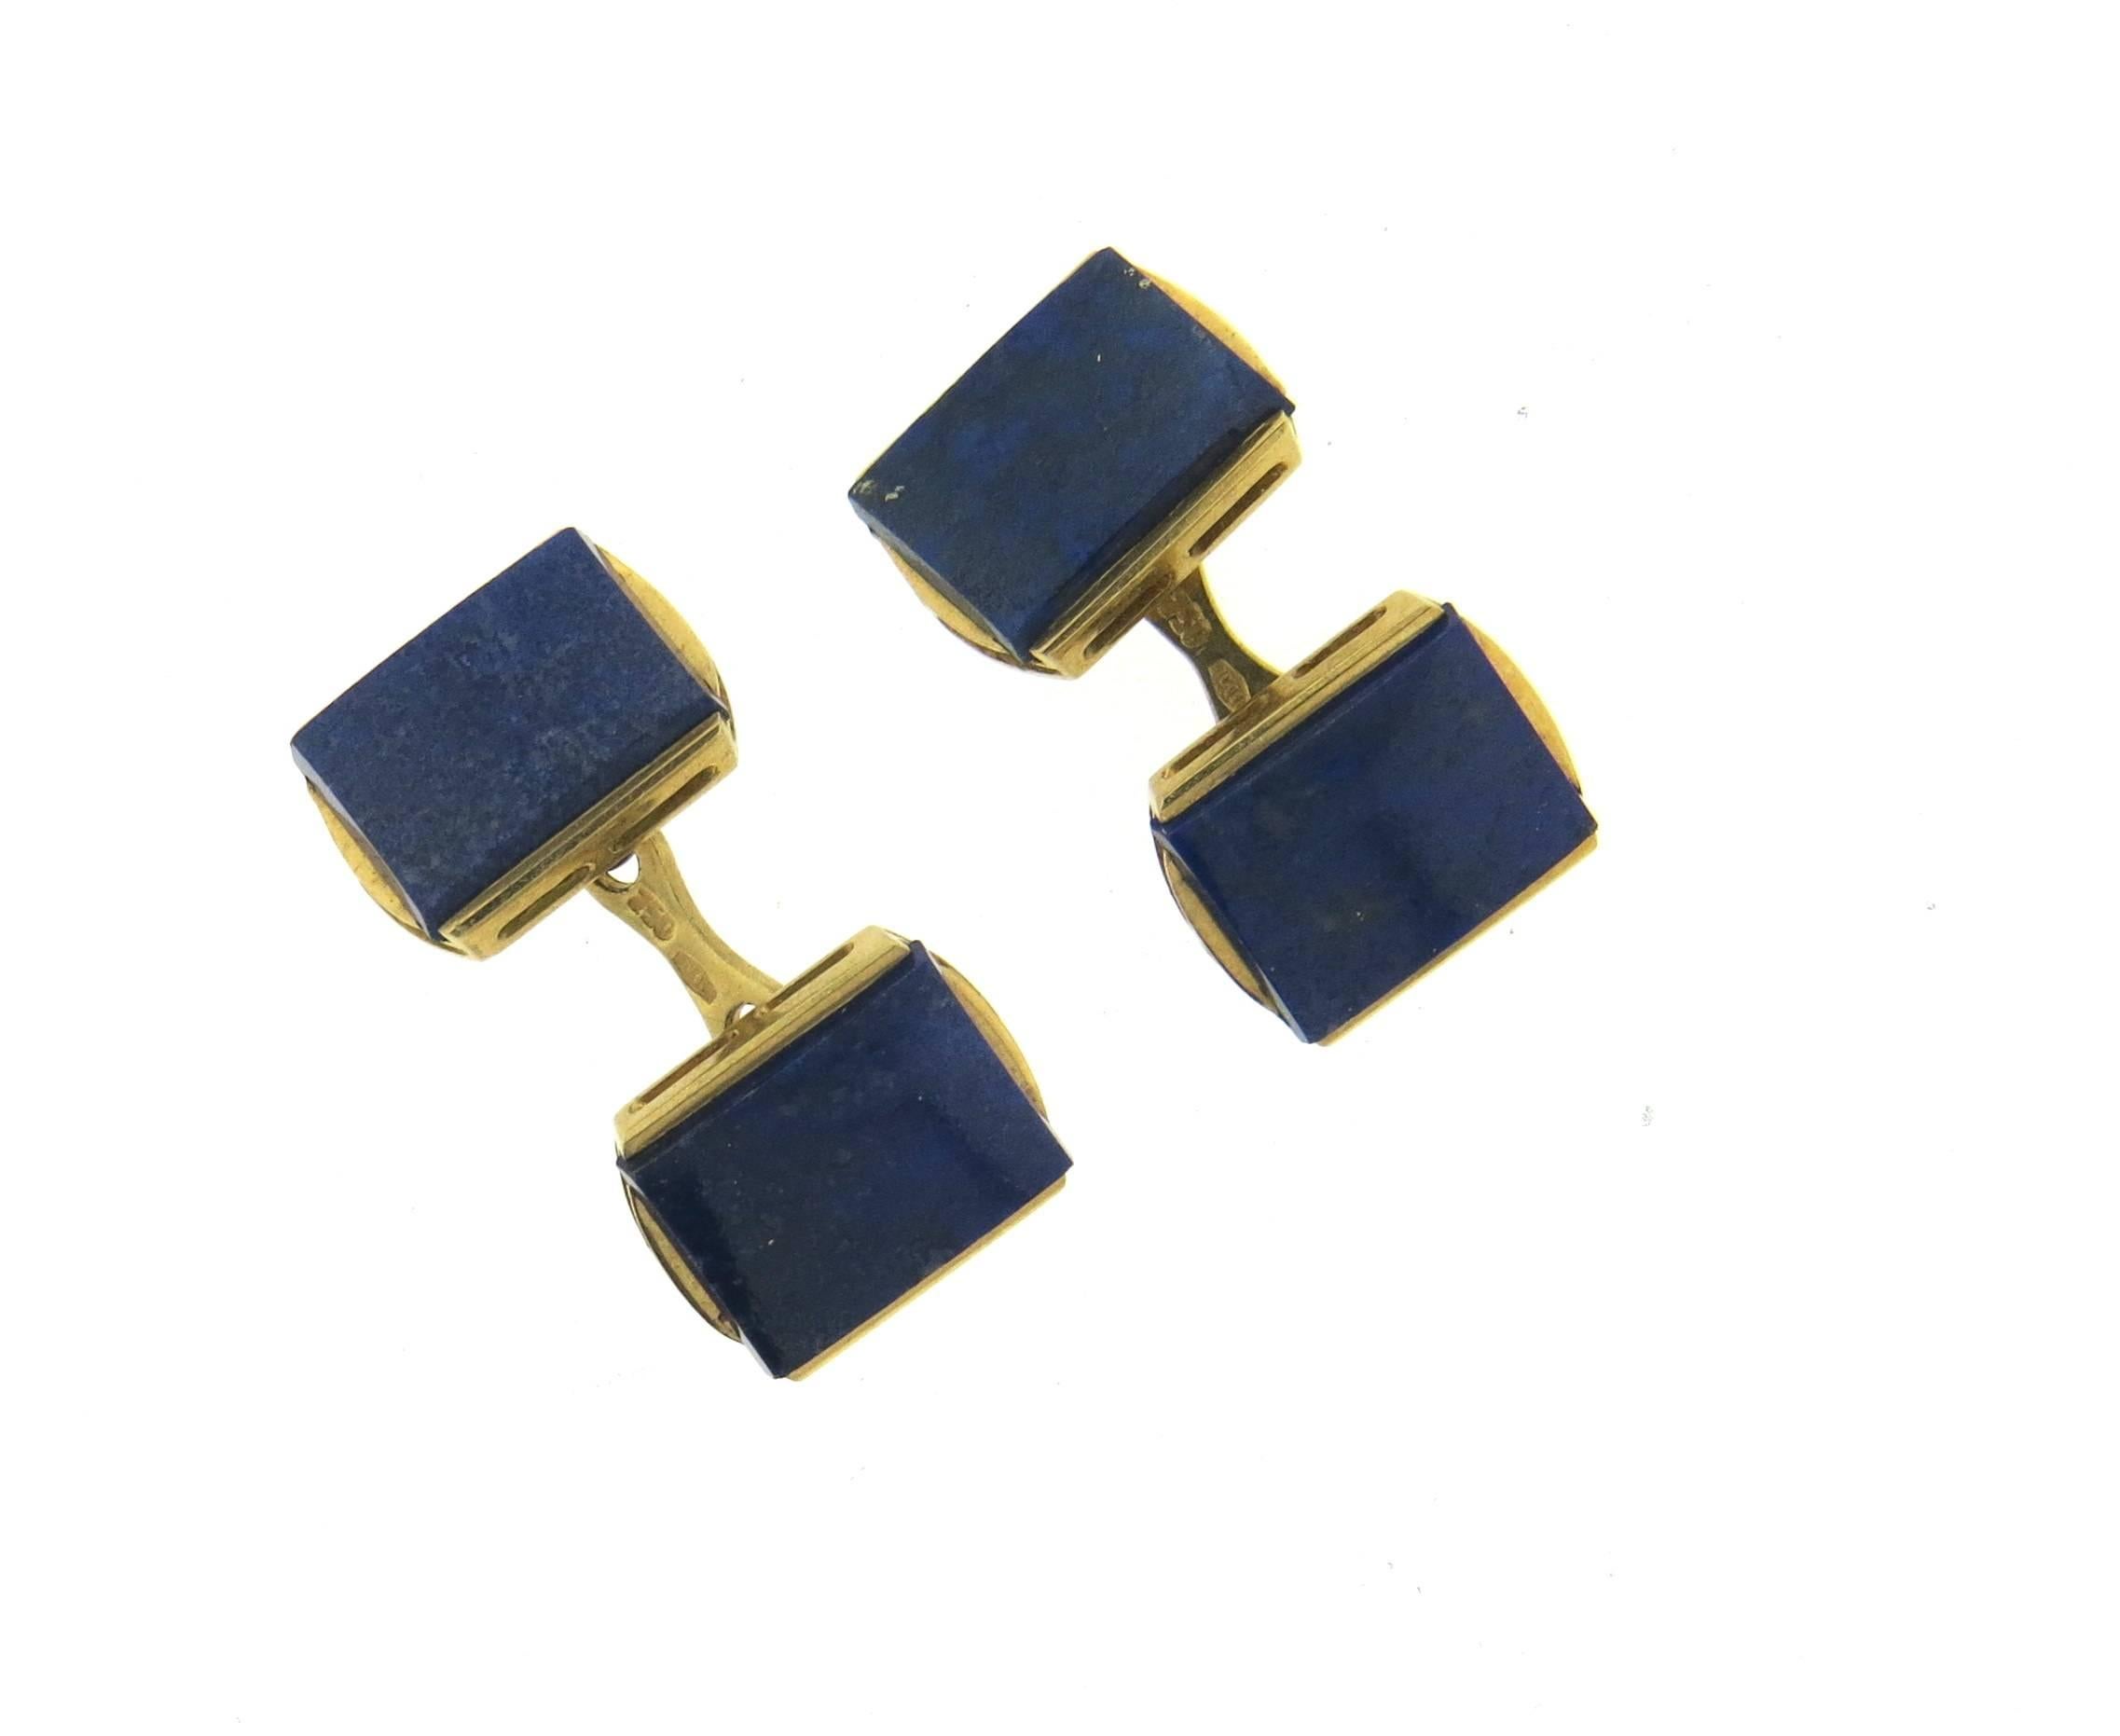 A pair of 18k yellow gold cufflinks, set with lapis lazuli stones. Each top measures 15mm x 11.5mm. Marked 750, 50 AL. Weight - 9.6 grams 